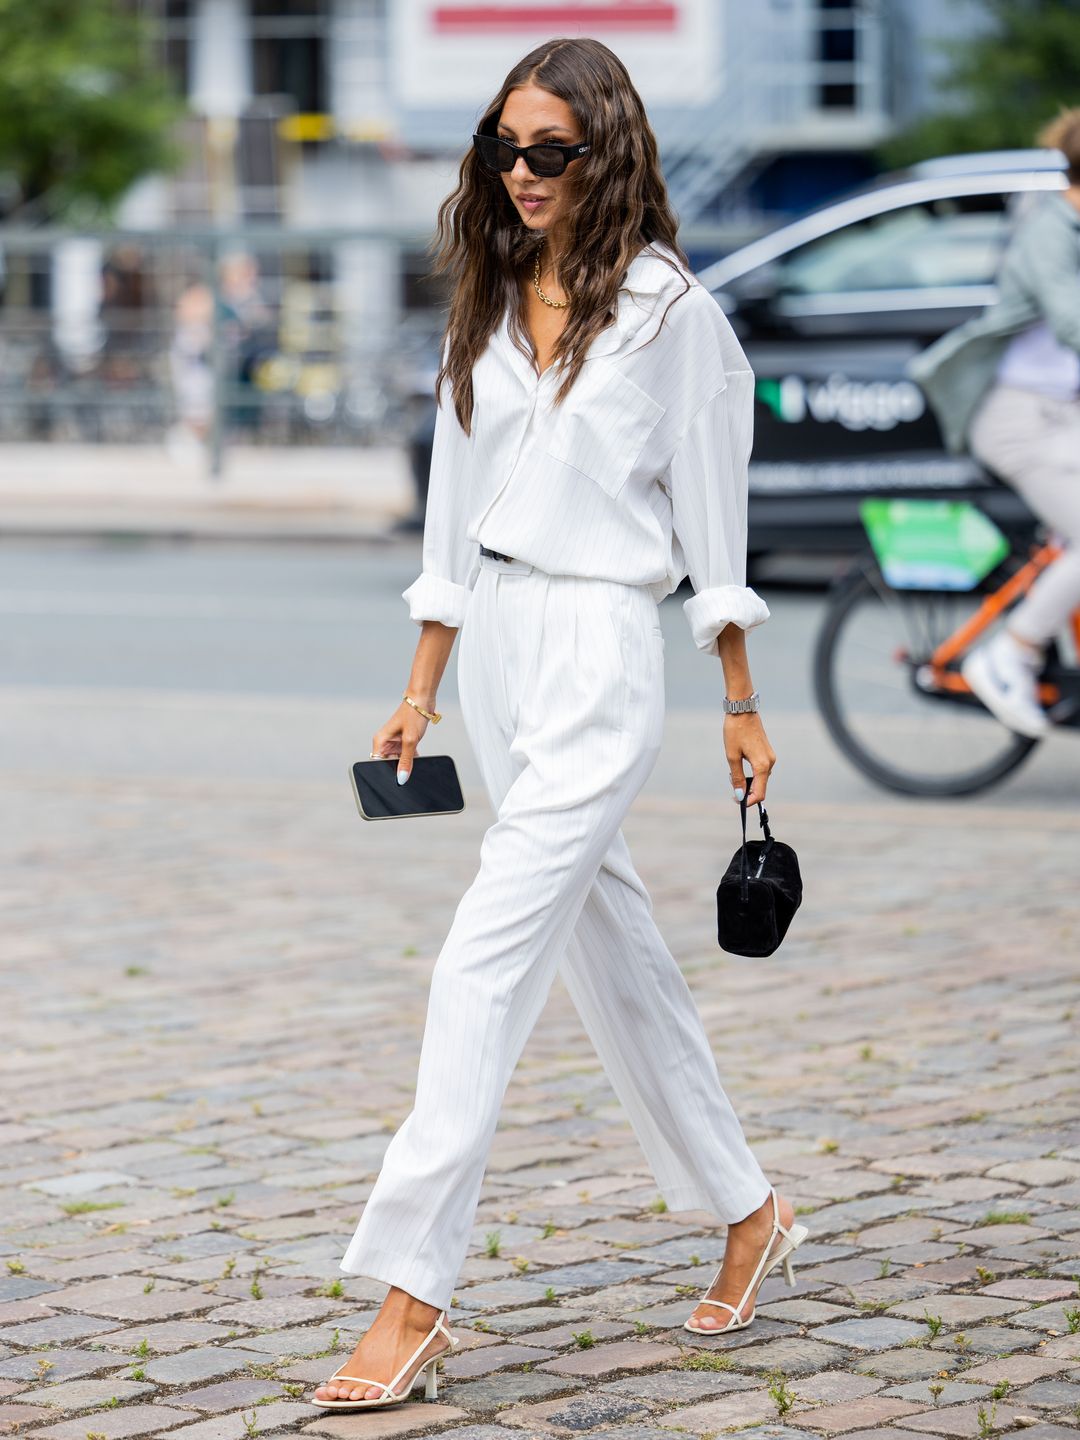 How to style a white shirt | HELLO!